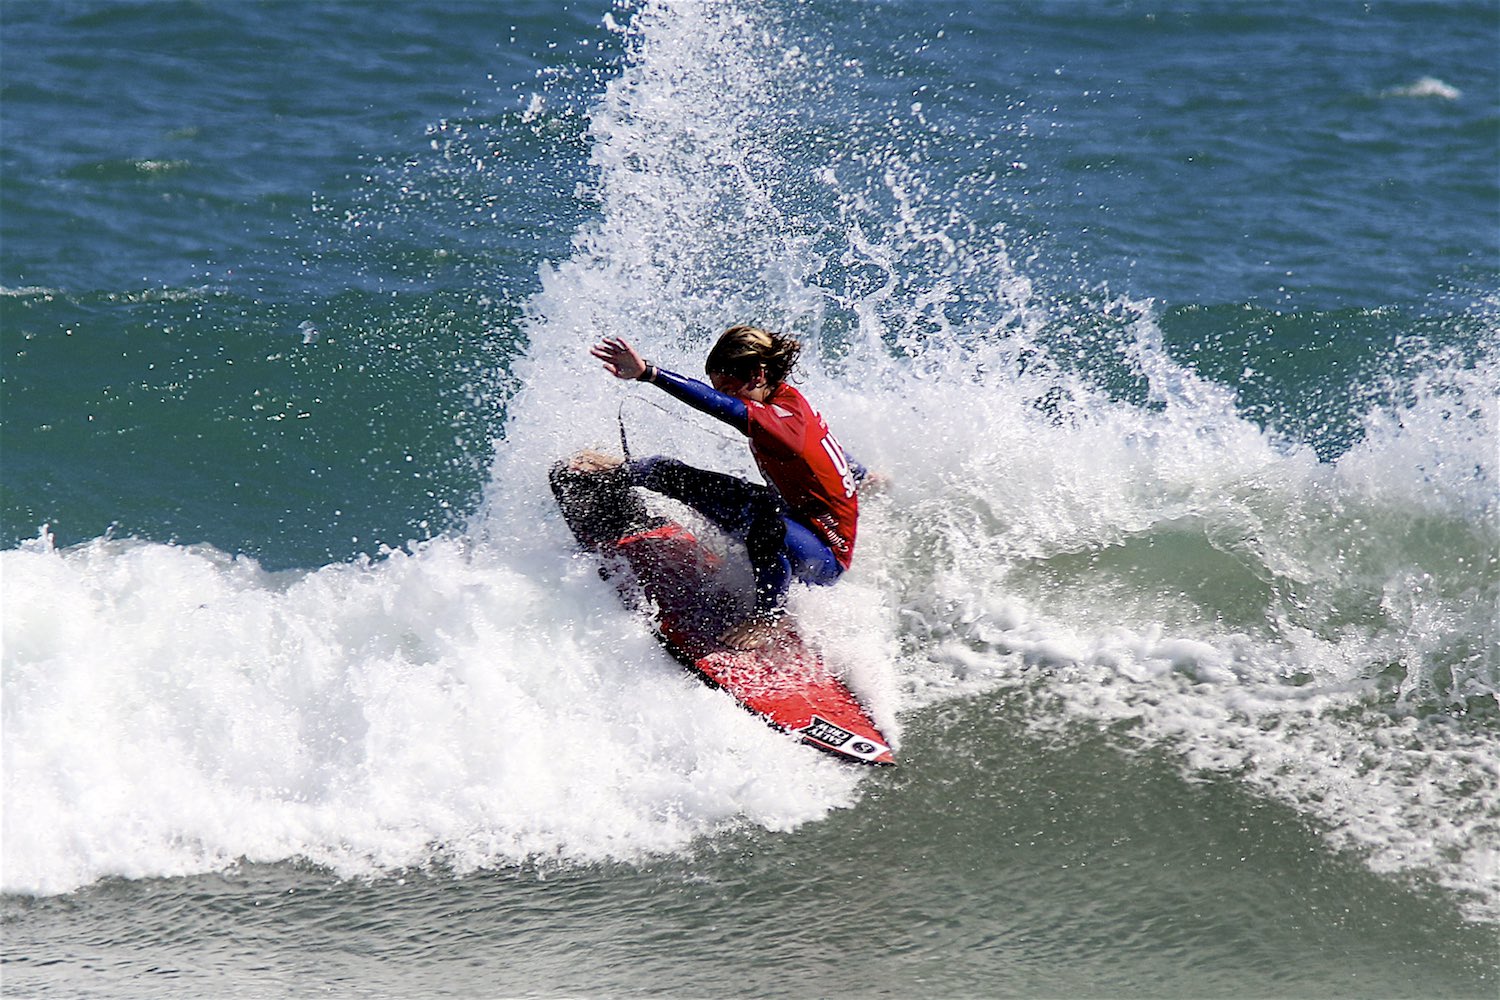 USA Surfing held a Prime event at Paradise Beach in Indialantic, Florida